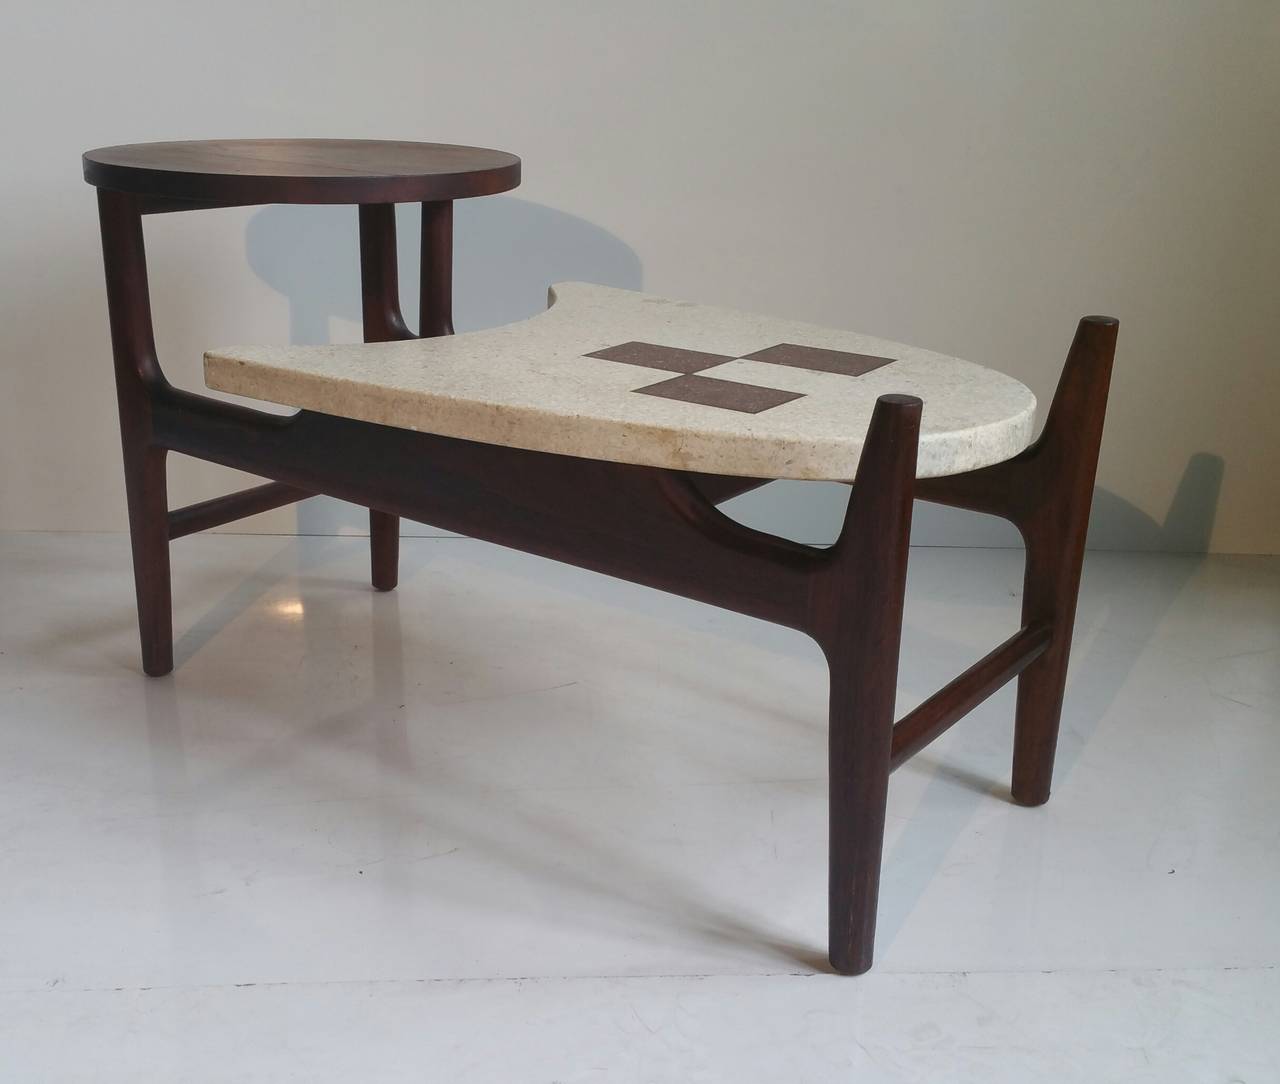 Amazing design, unusual two-tier walnut and inlay terrazzo table. Step end, cocktail, occasional, would enhance any environment.